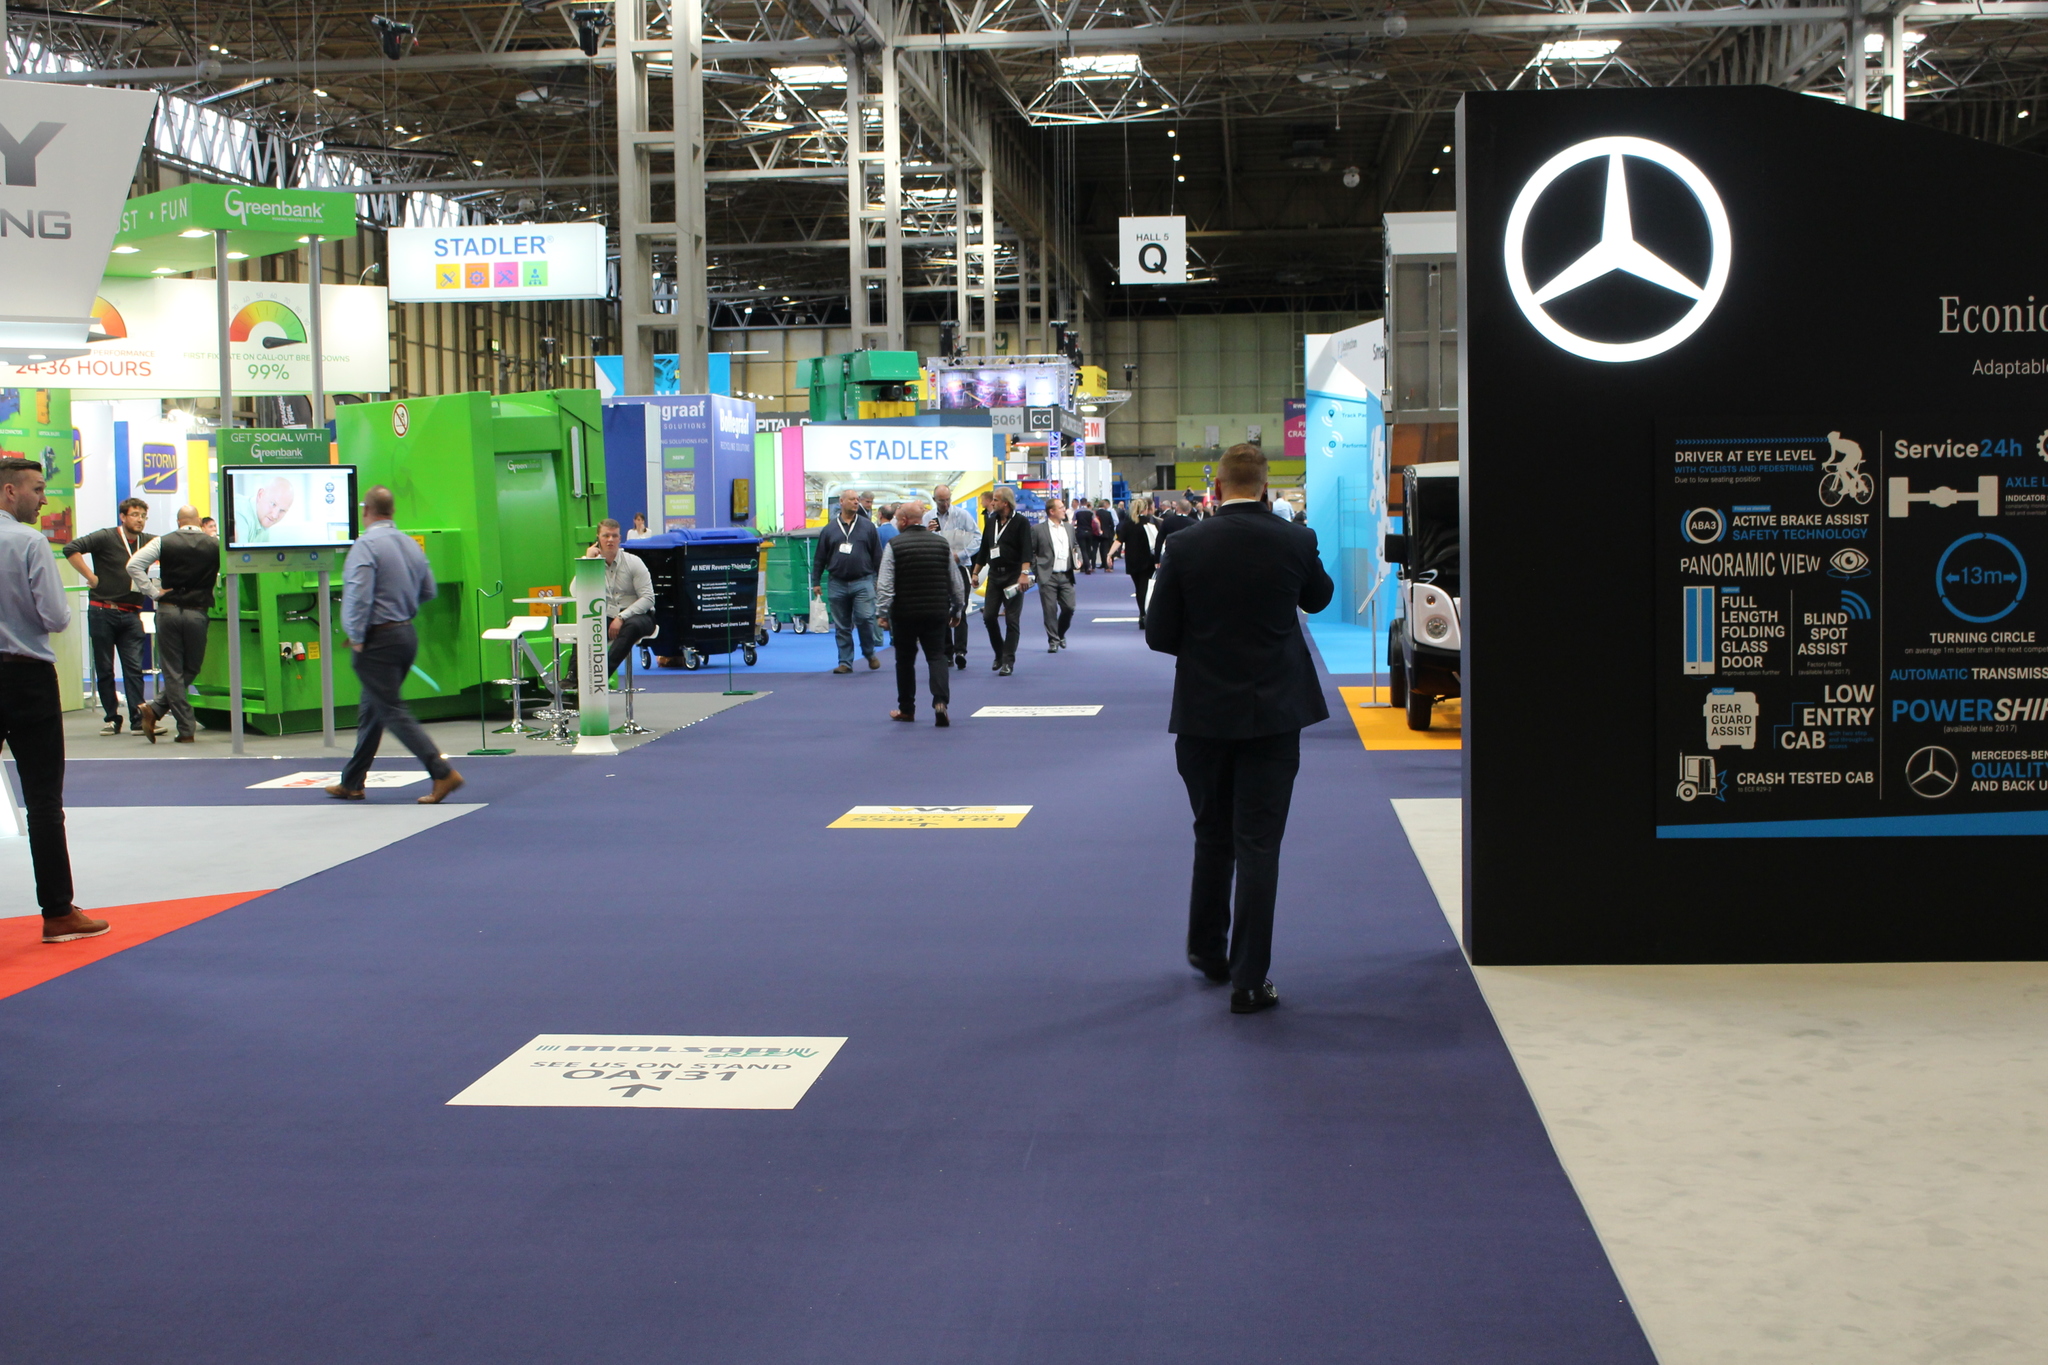 4 great ways promotional staff can attract and qualify valuable trade show sales leads